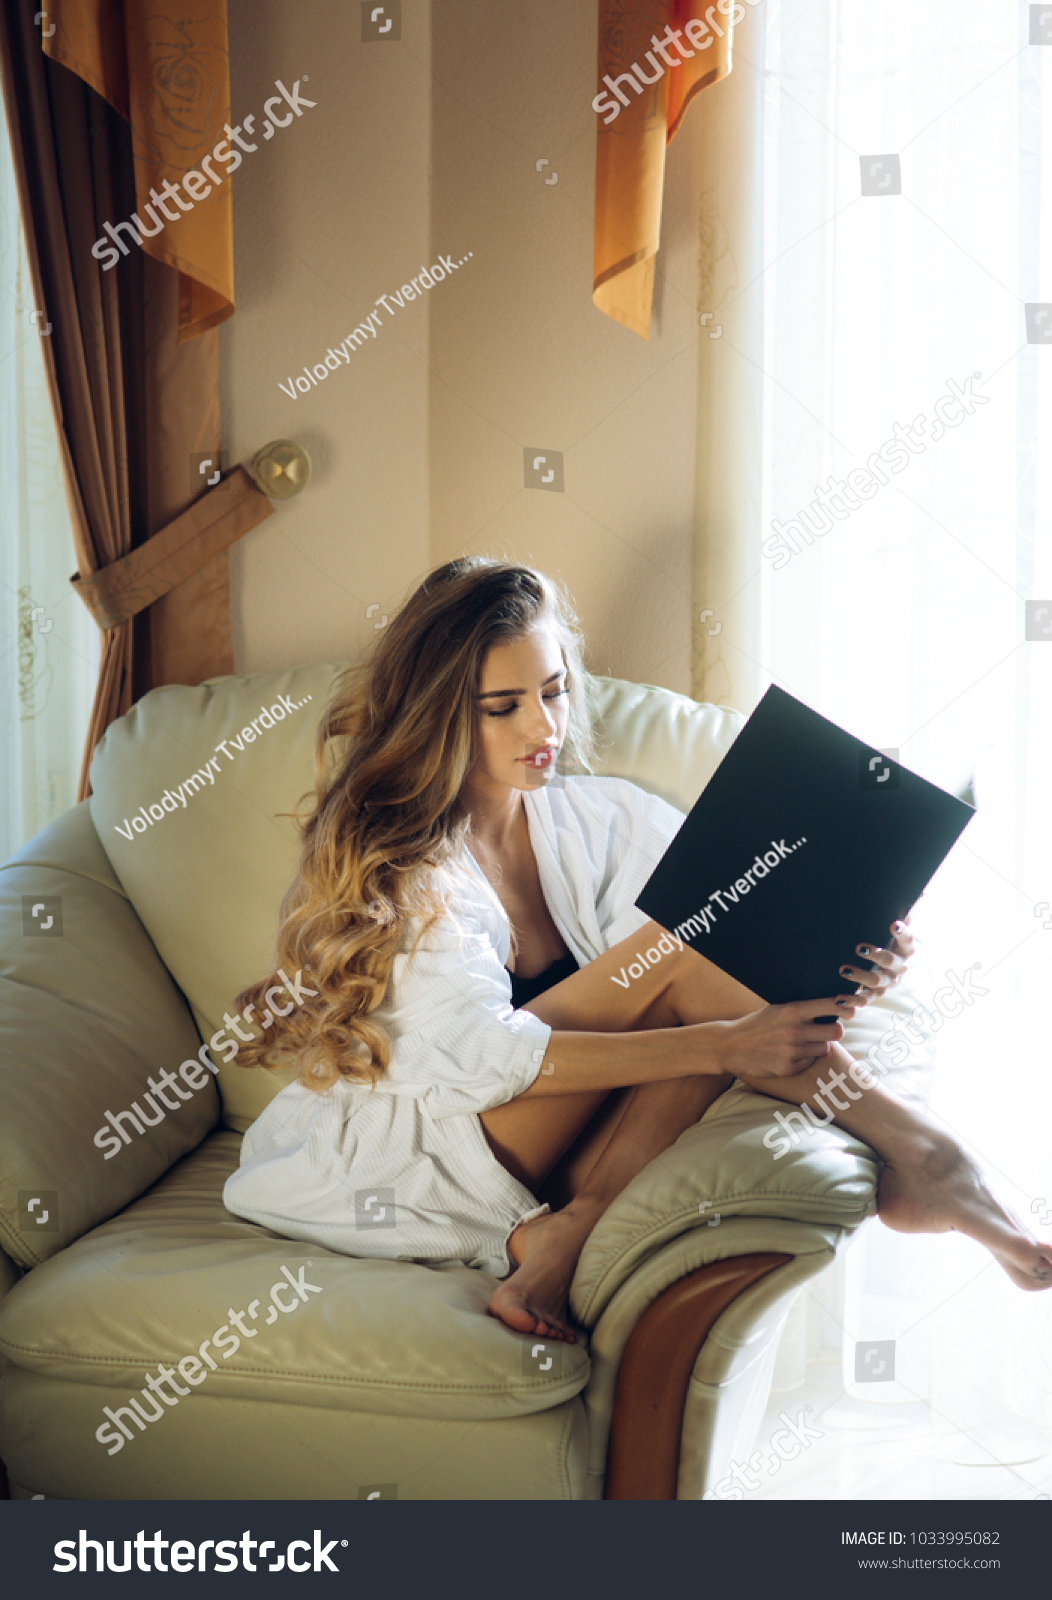 Lady with busy face in bathrobe reads book near window. Girl enjoys morning reading siting on armchair. Sexy nude woman with long hair looks hot and desire. Attraction and desire concept. #1033995082